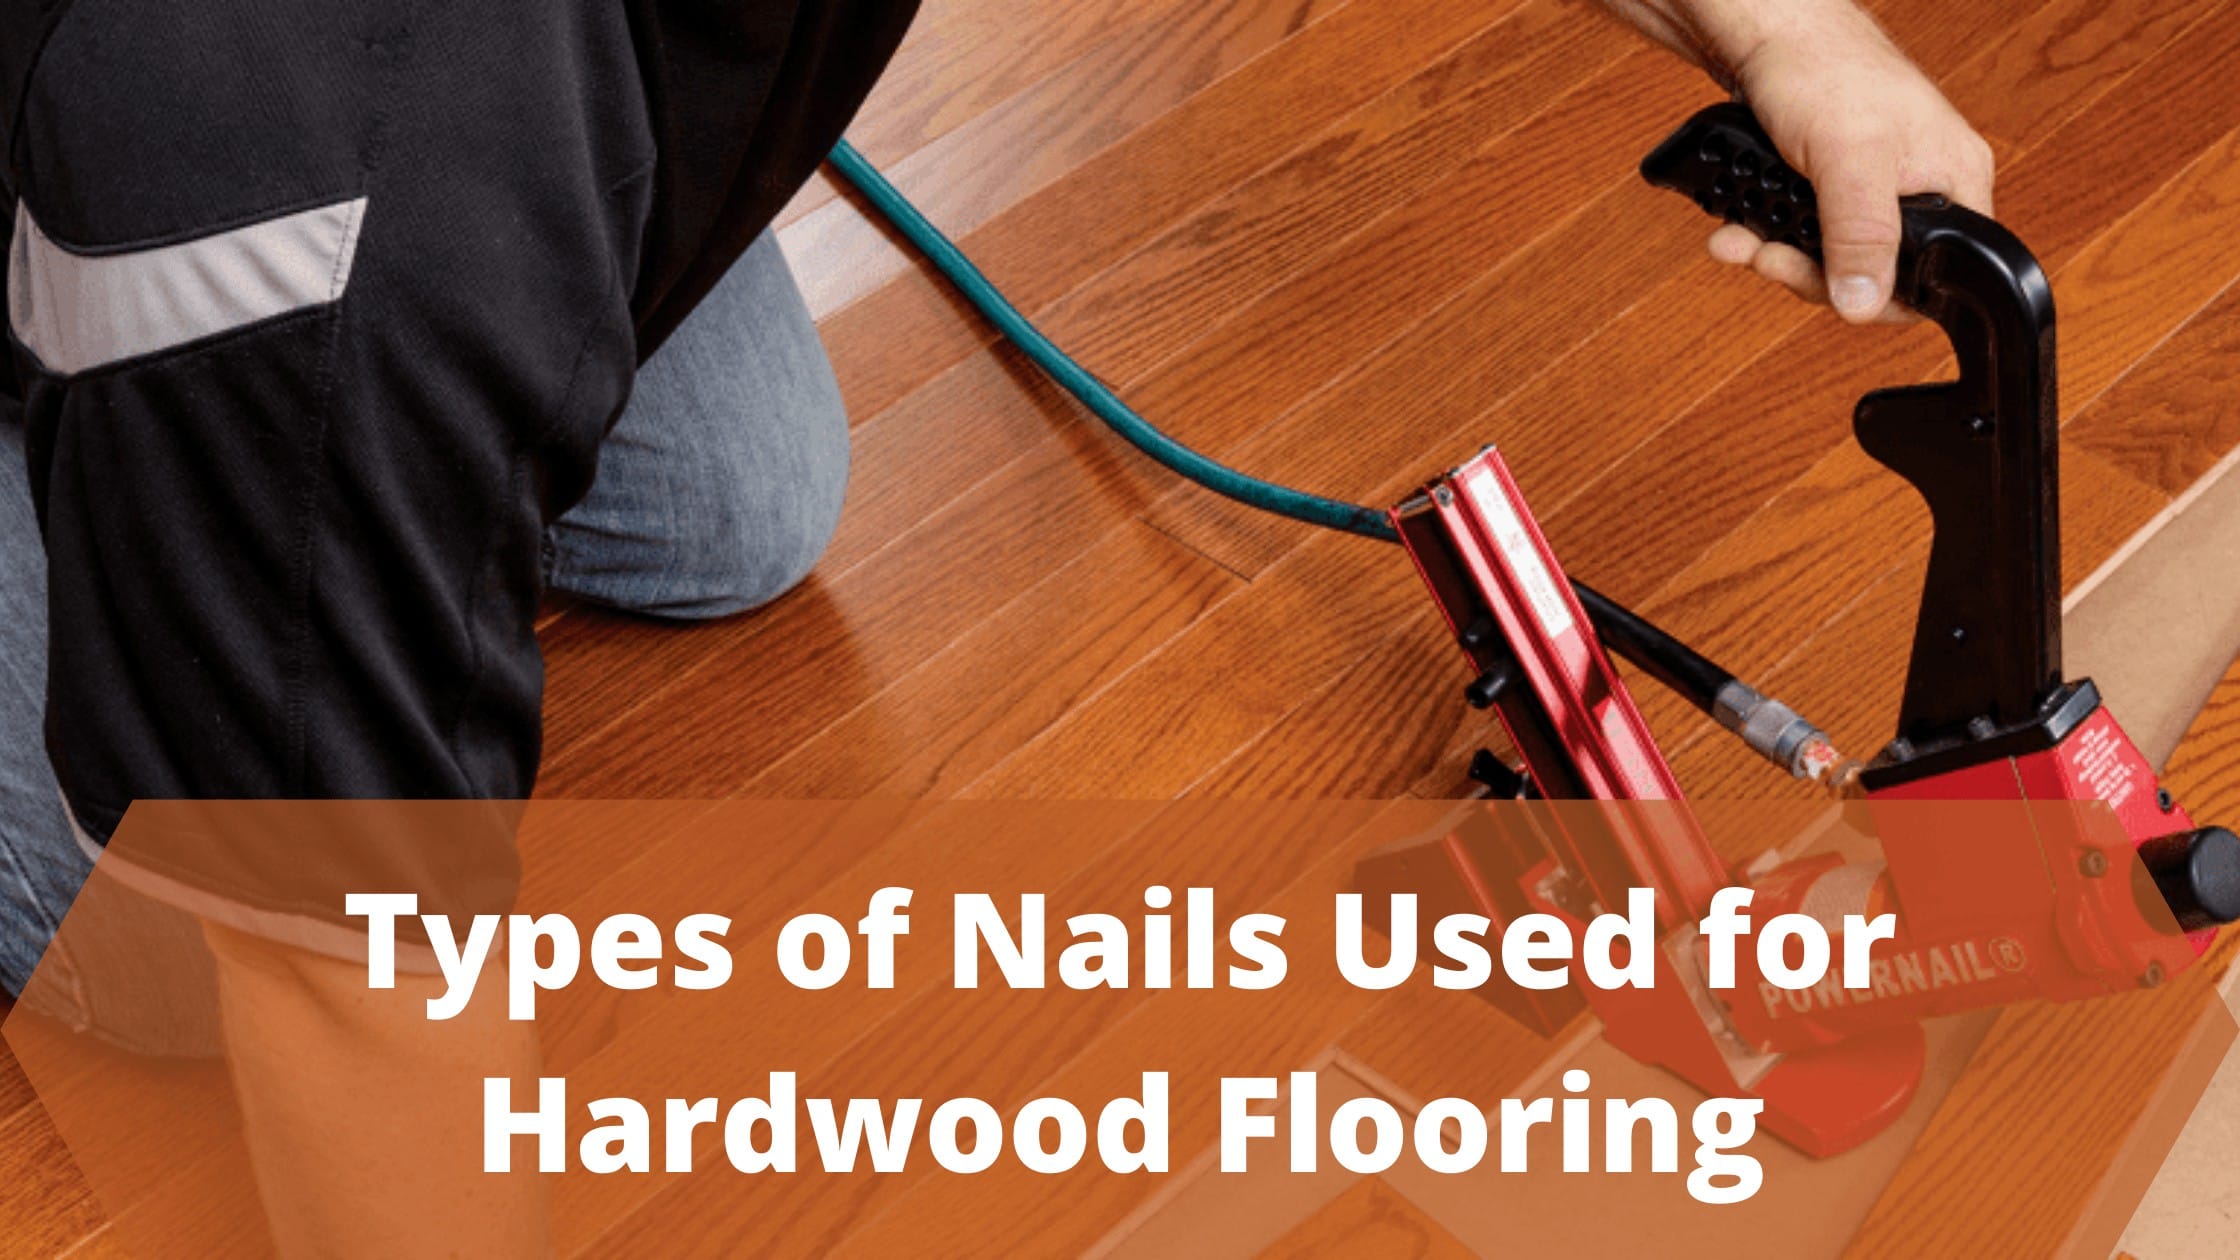 7 Types of Nails Used for Hardwood Flooring